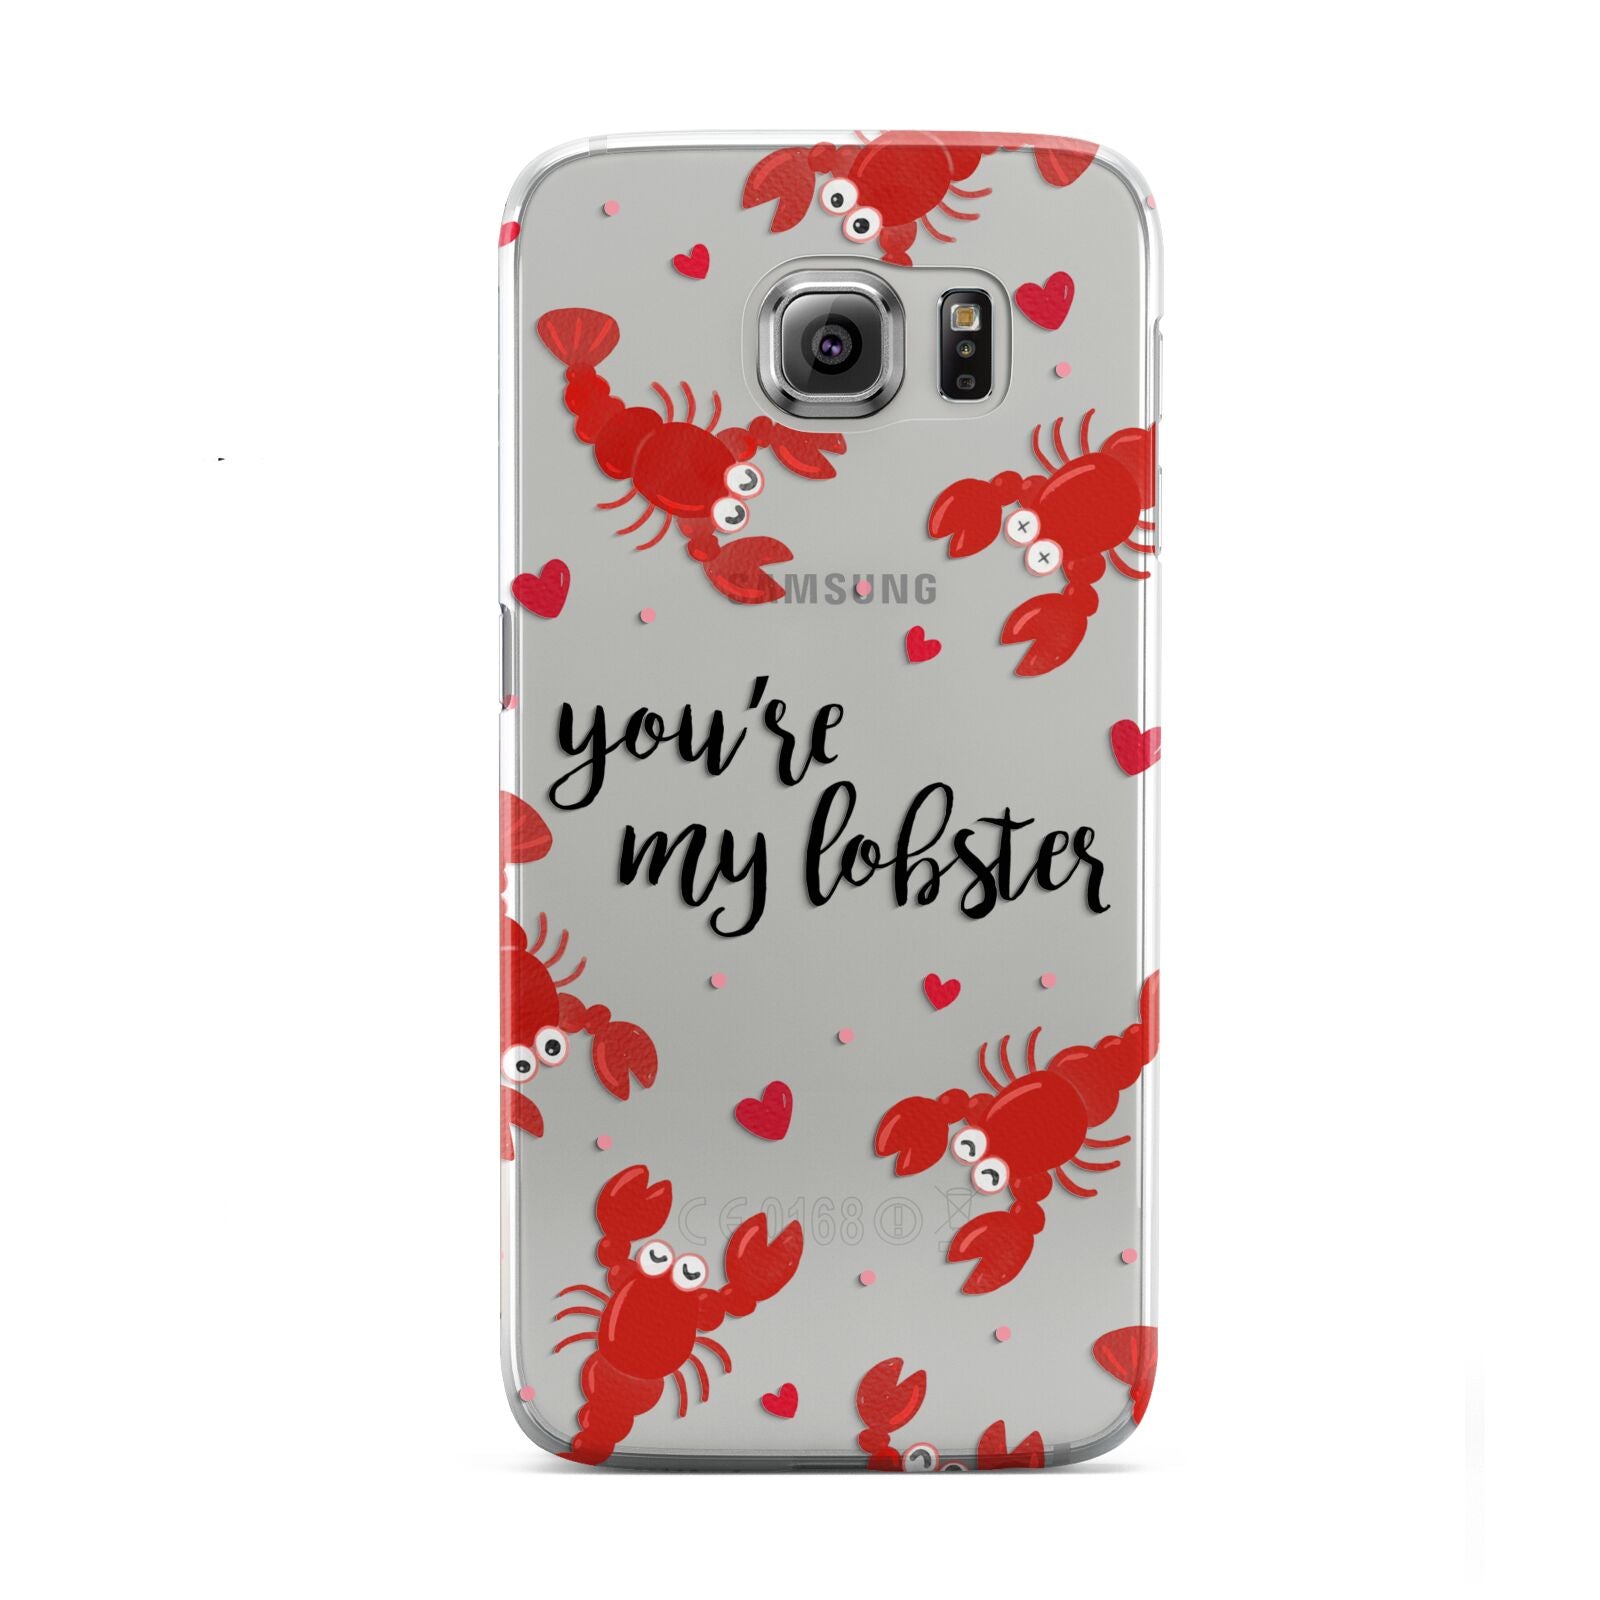 Youre My Lobster Samsung Galaxy S6 Case